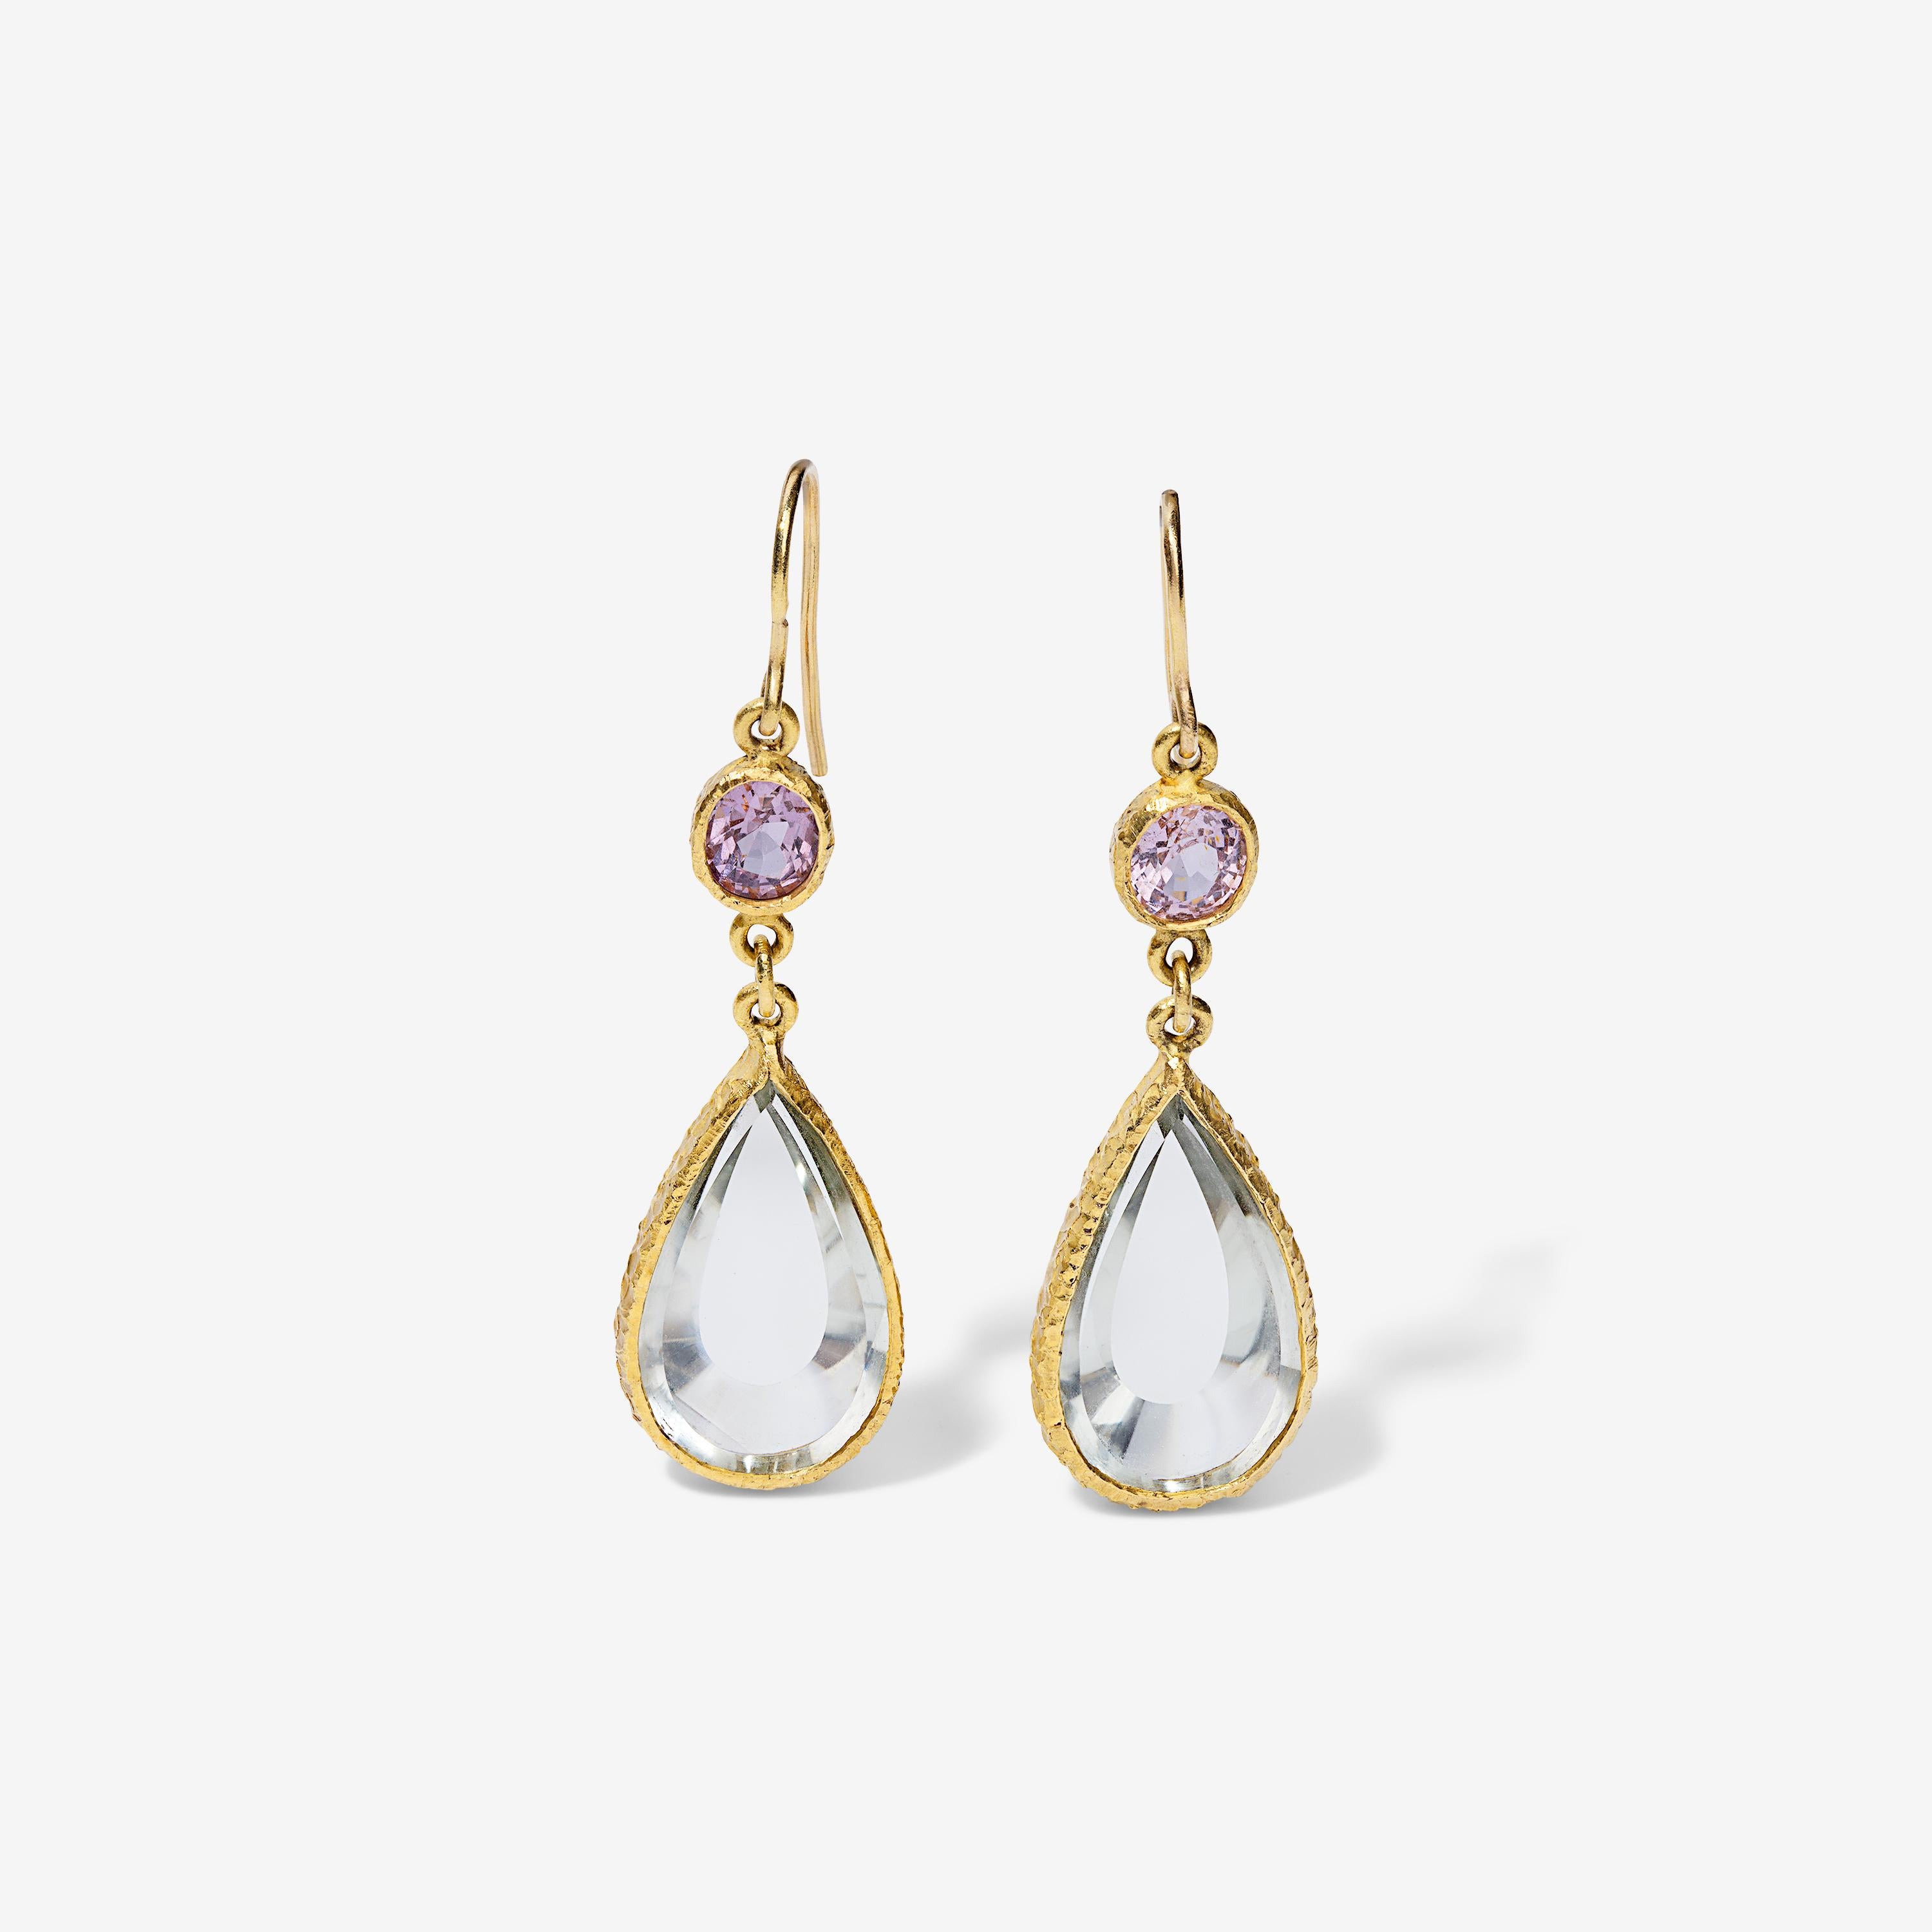 These dangle earrings feature exceptionally clear green amethyst pears that are accented by delicately pink kunzite gemstones, all set in 22k yellow gold.

By Jack Bigio  Part of the Summerset Vault Collection

Jack Bigio is one of our most beloved